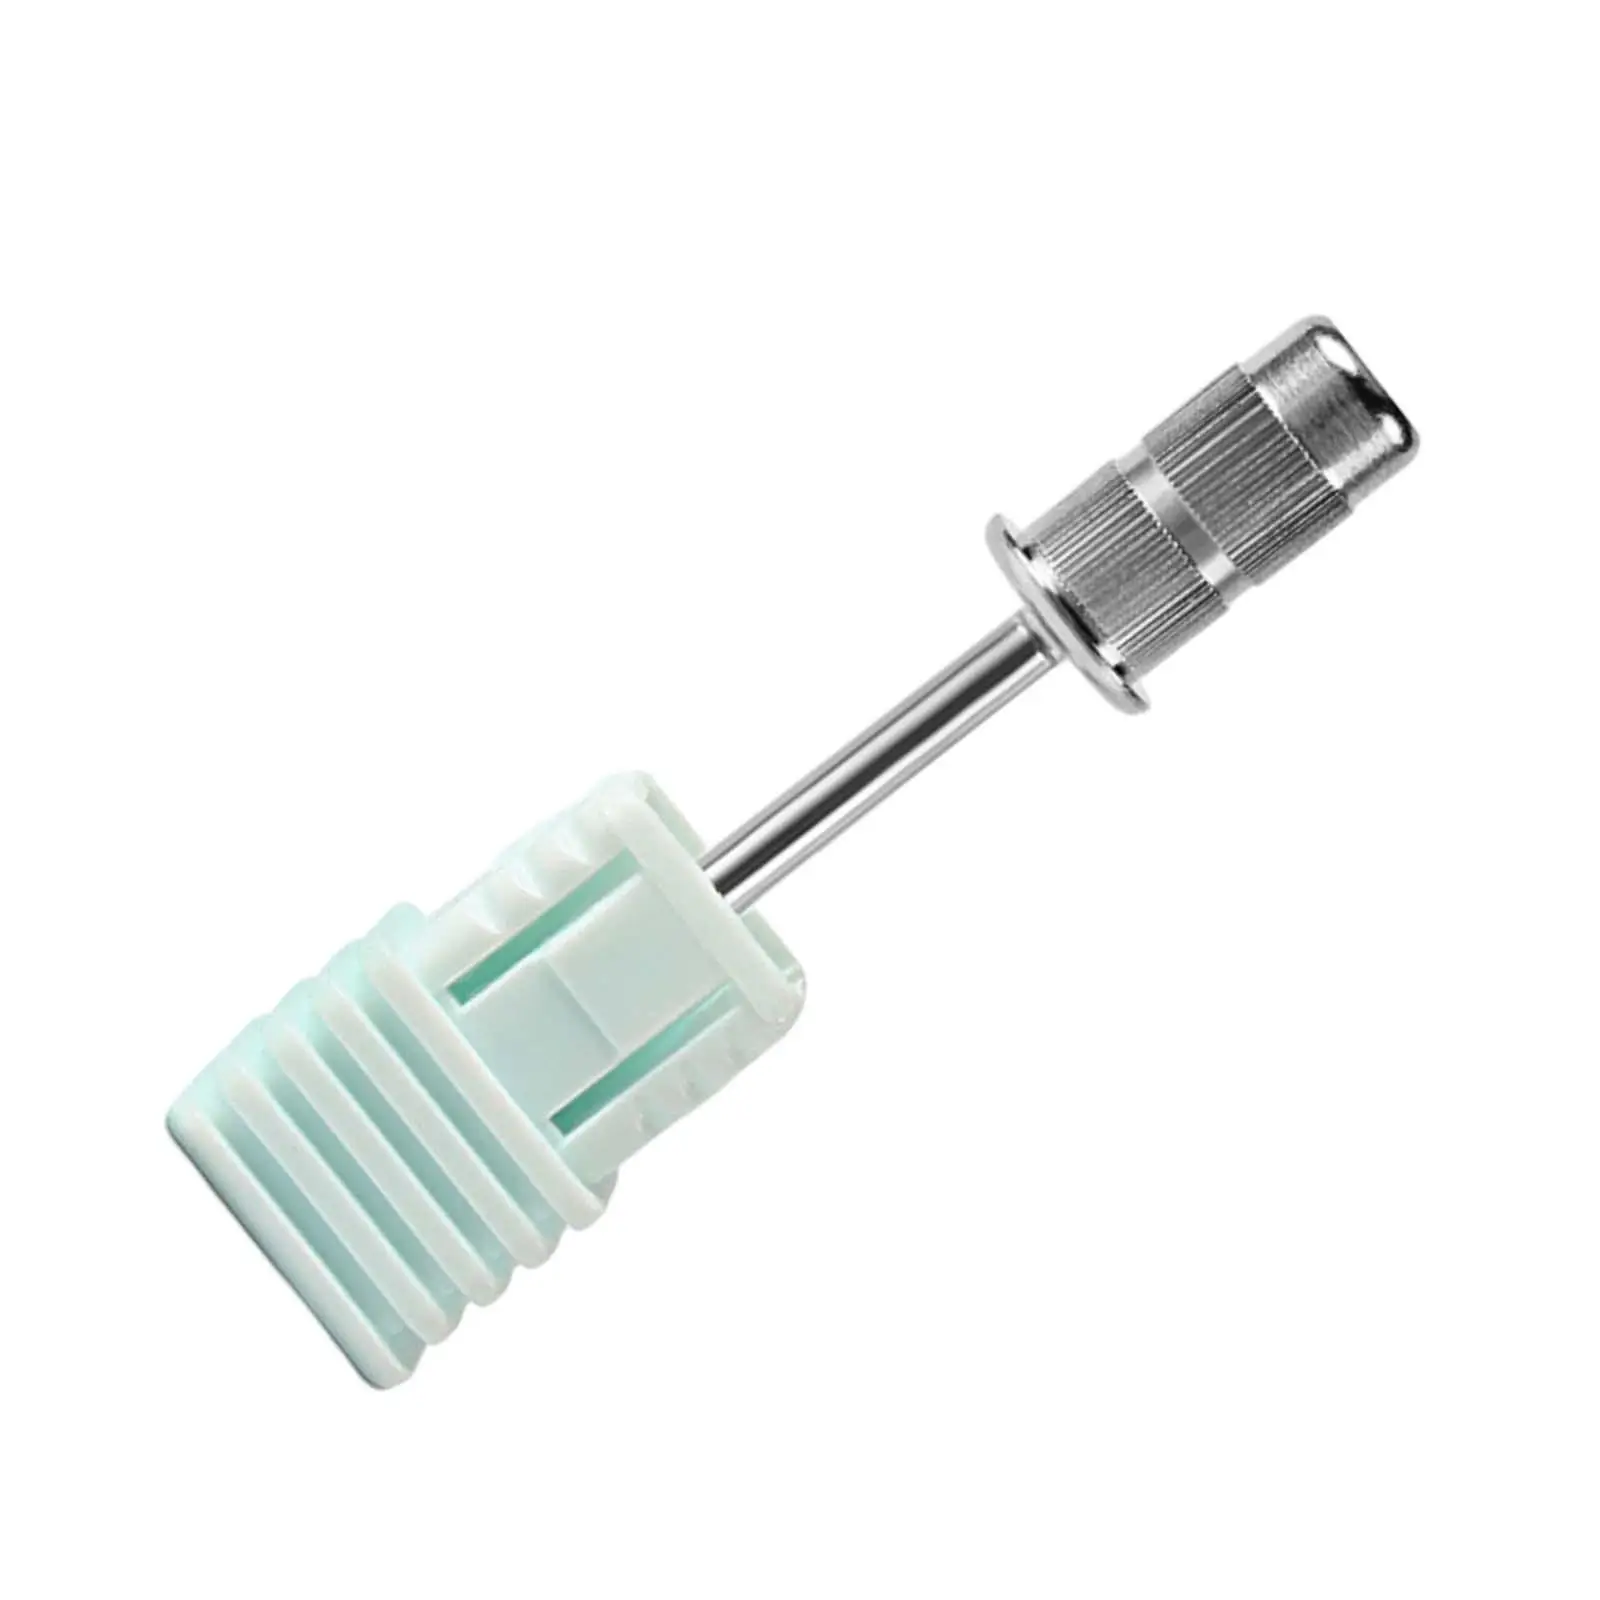 Sanding Bands Nail Drills Bits Electric File Nail Sanders Parts Shaft for SPA Salon Pedicures Manicure Acrylic Nails